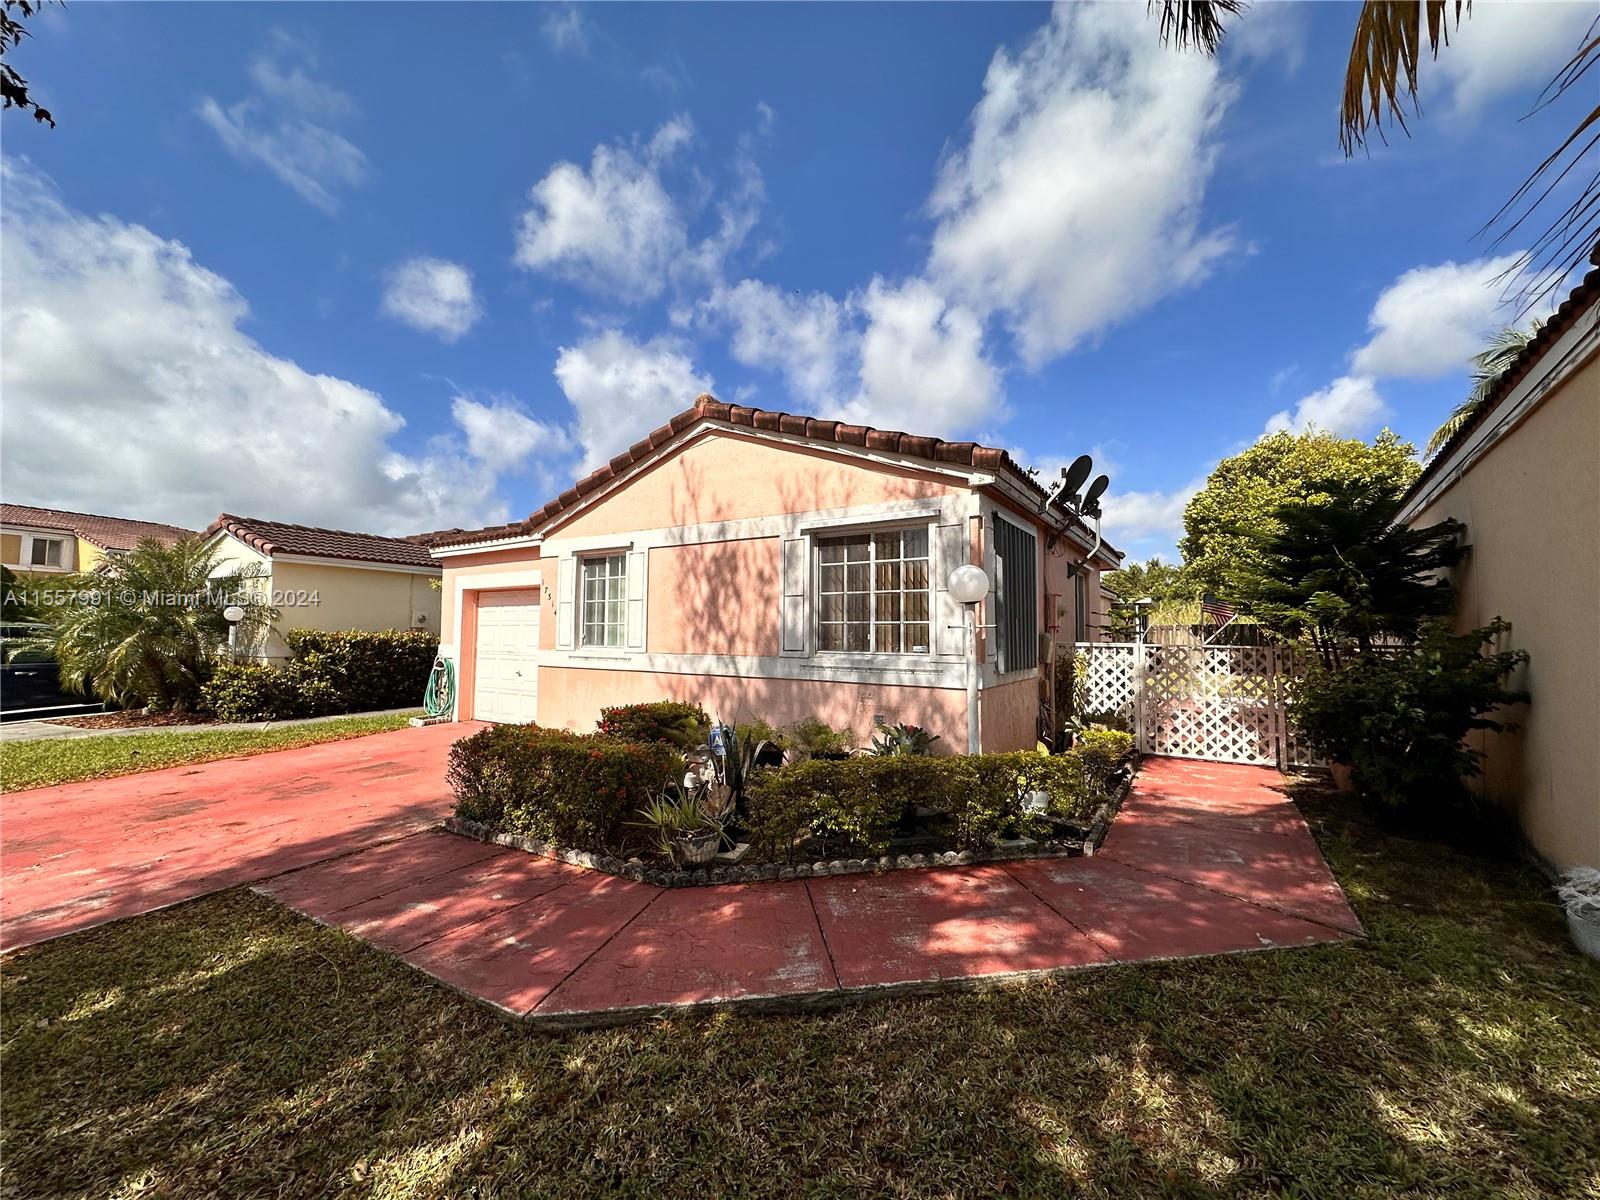 17314 SW 142nd Pl, Miami, Florida 33177, 3 Bedrooms Bedrooms, ,2 BathroomsBathrooms,Residential,For Sale,17314 SW 142nd Pl,A11557991